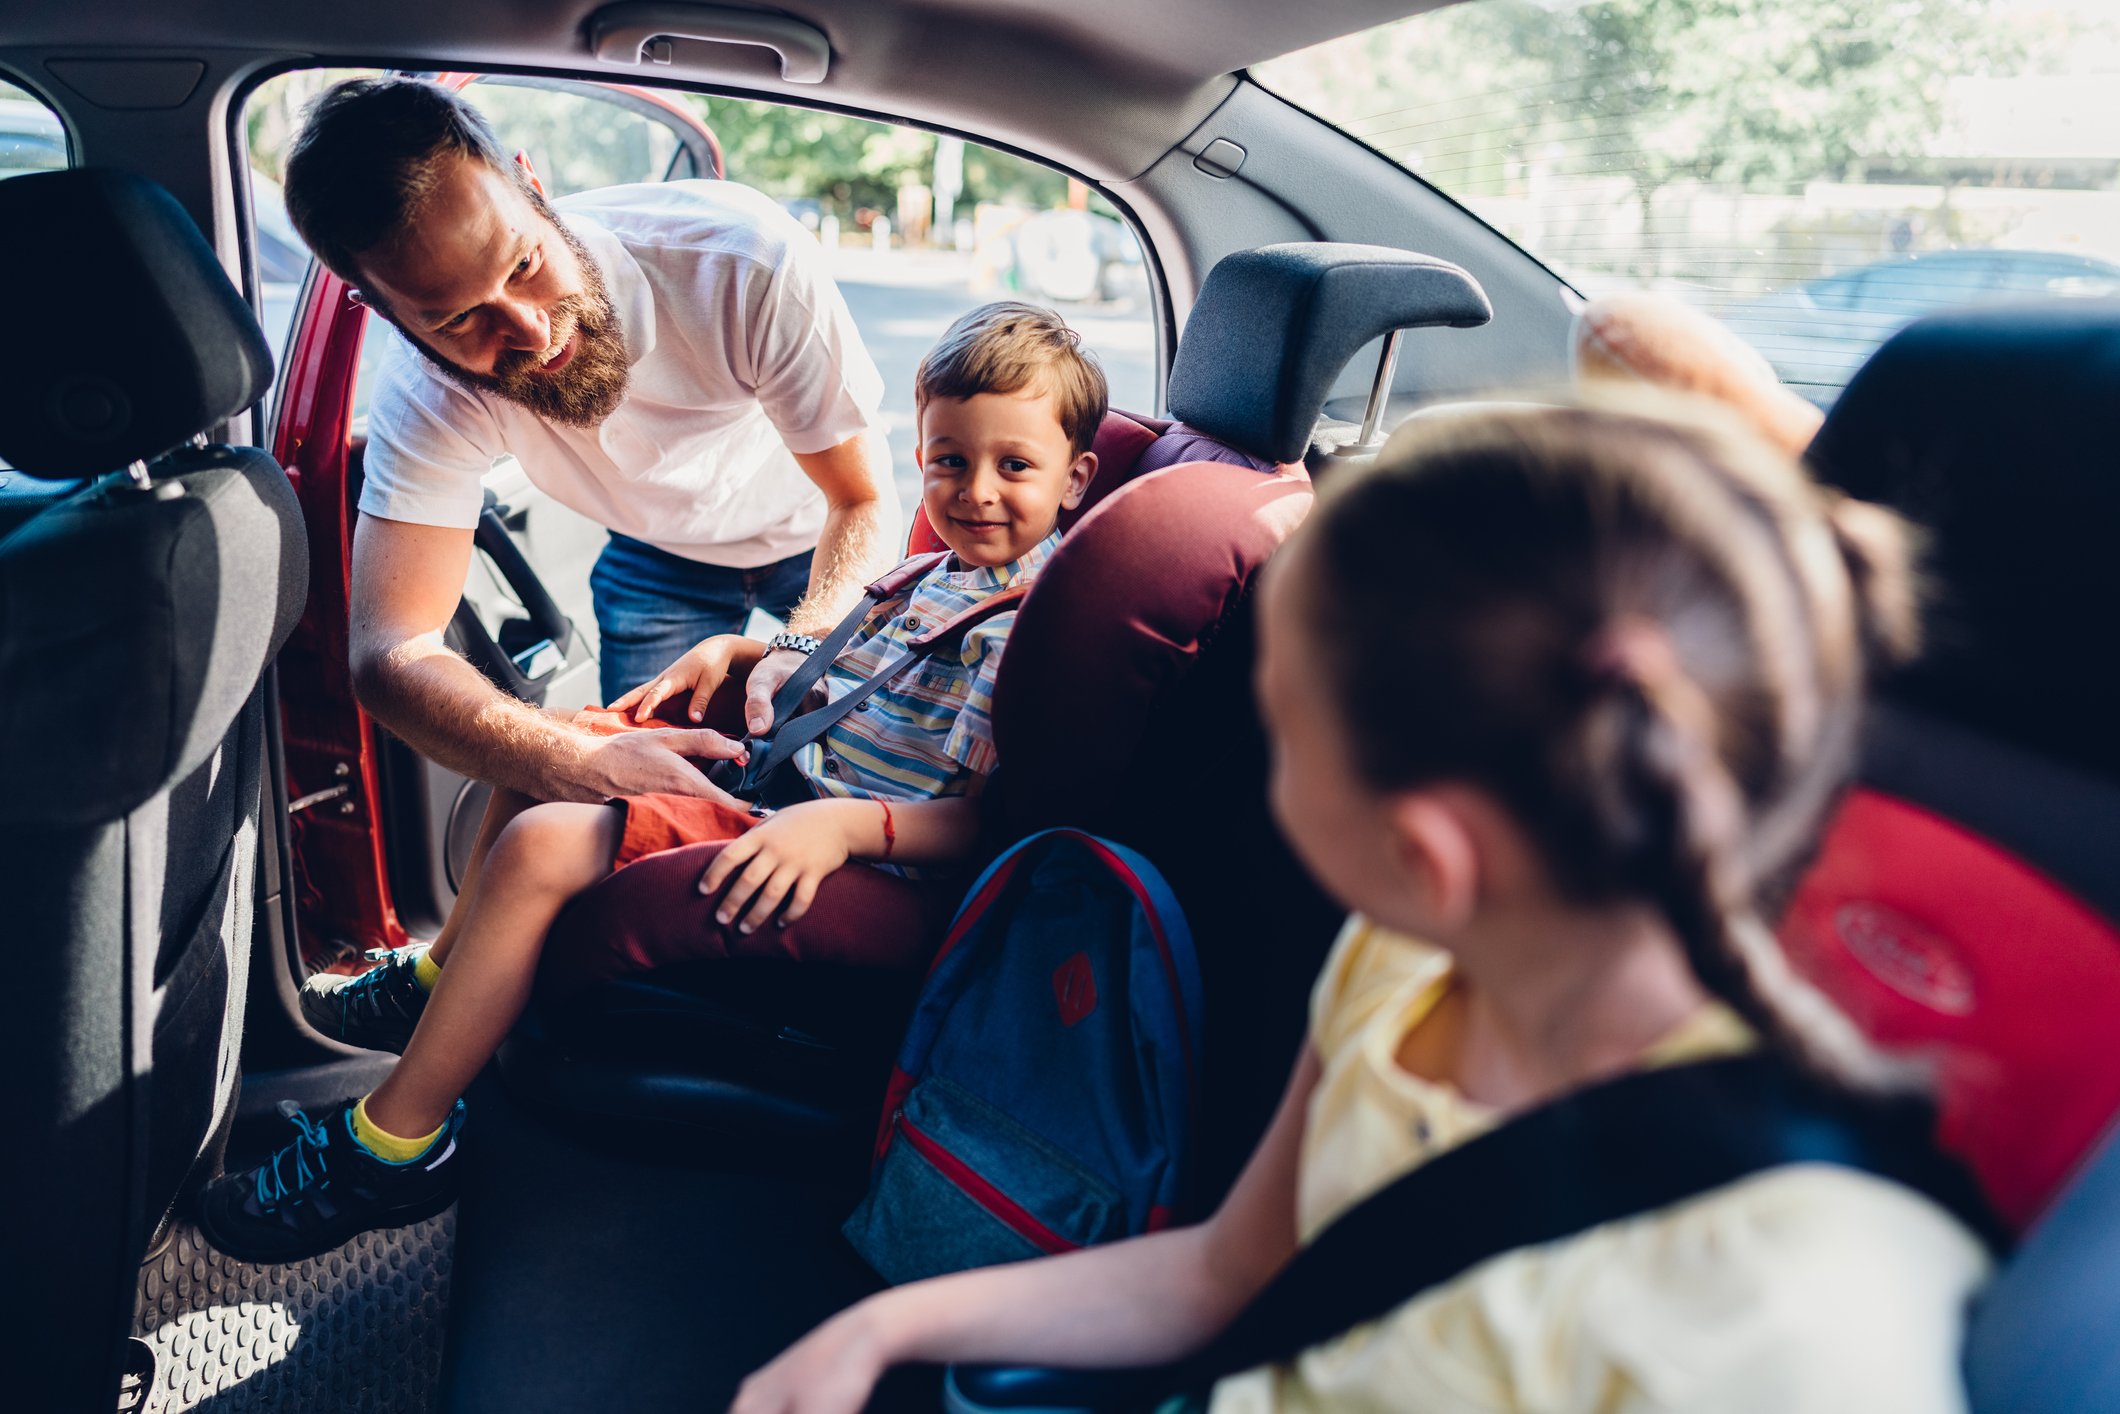 SUVs are the preferred choice for families